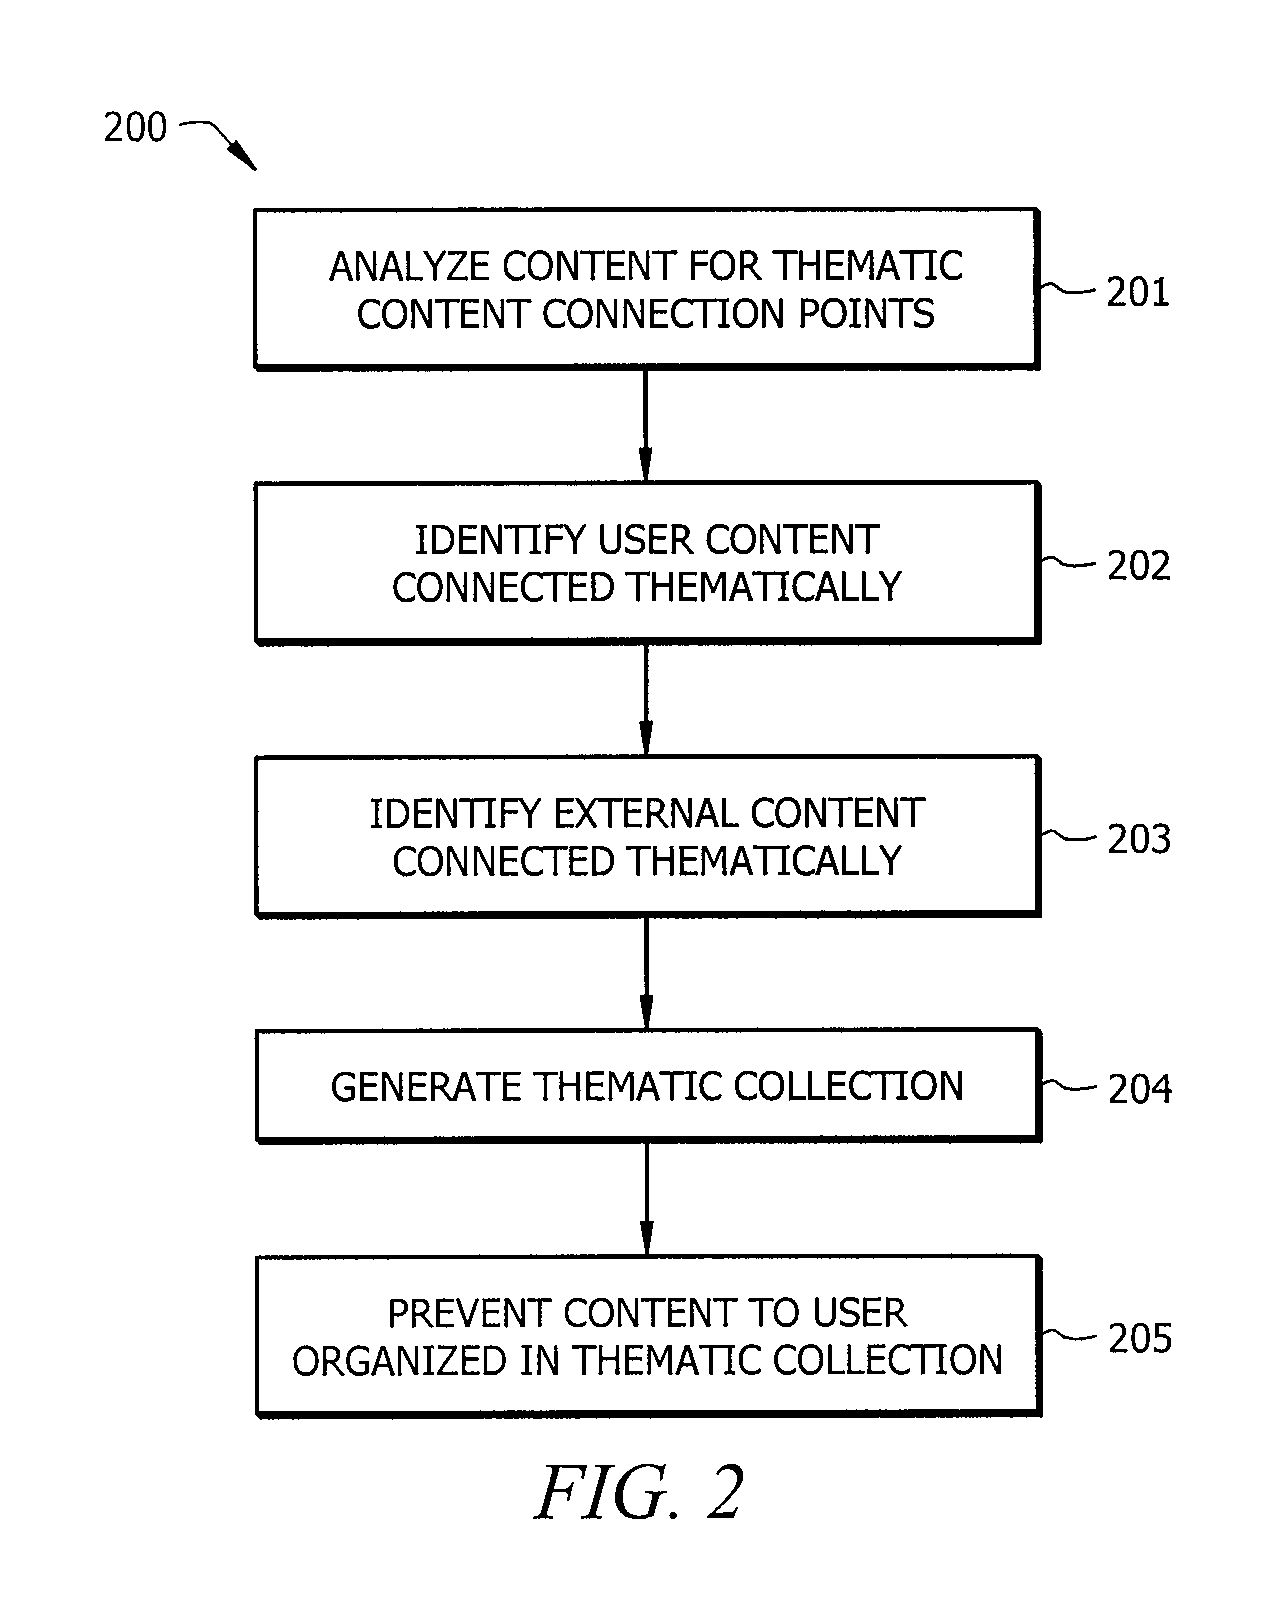 Systems and methods for organizing content using content organization rules and robust content information